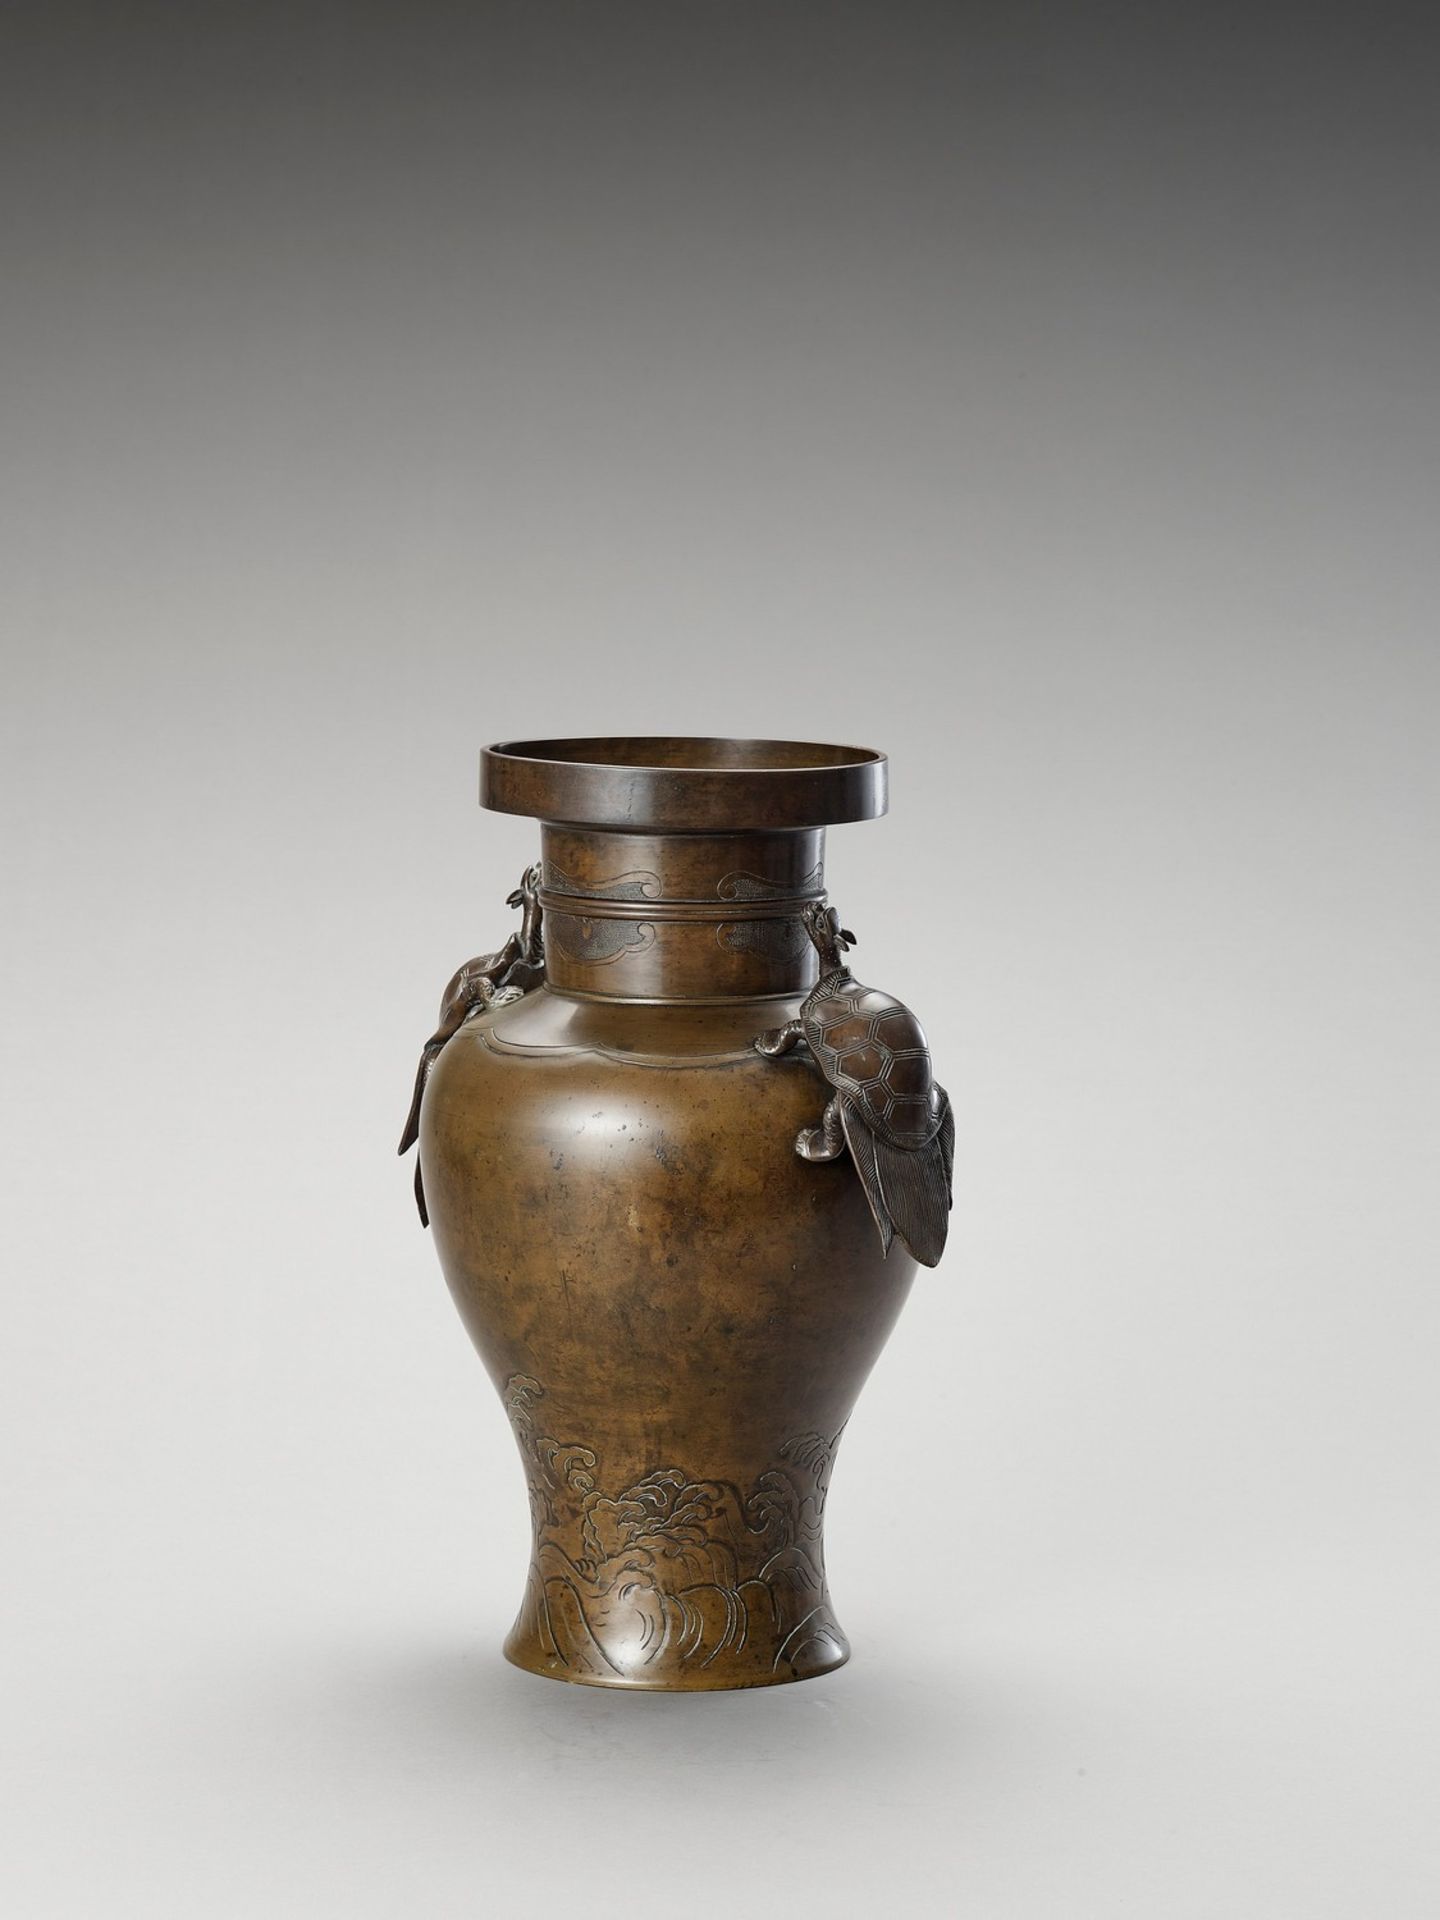 A BRONZE BALUSTER VASE WITH MINOGAME AND WAVES - Image 4 of 8